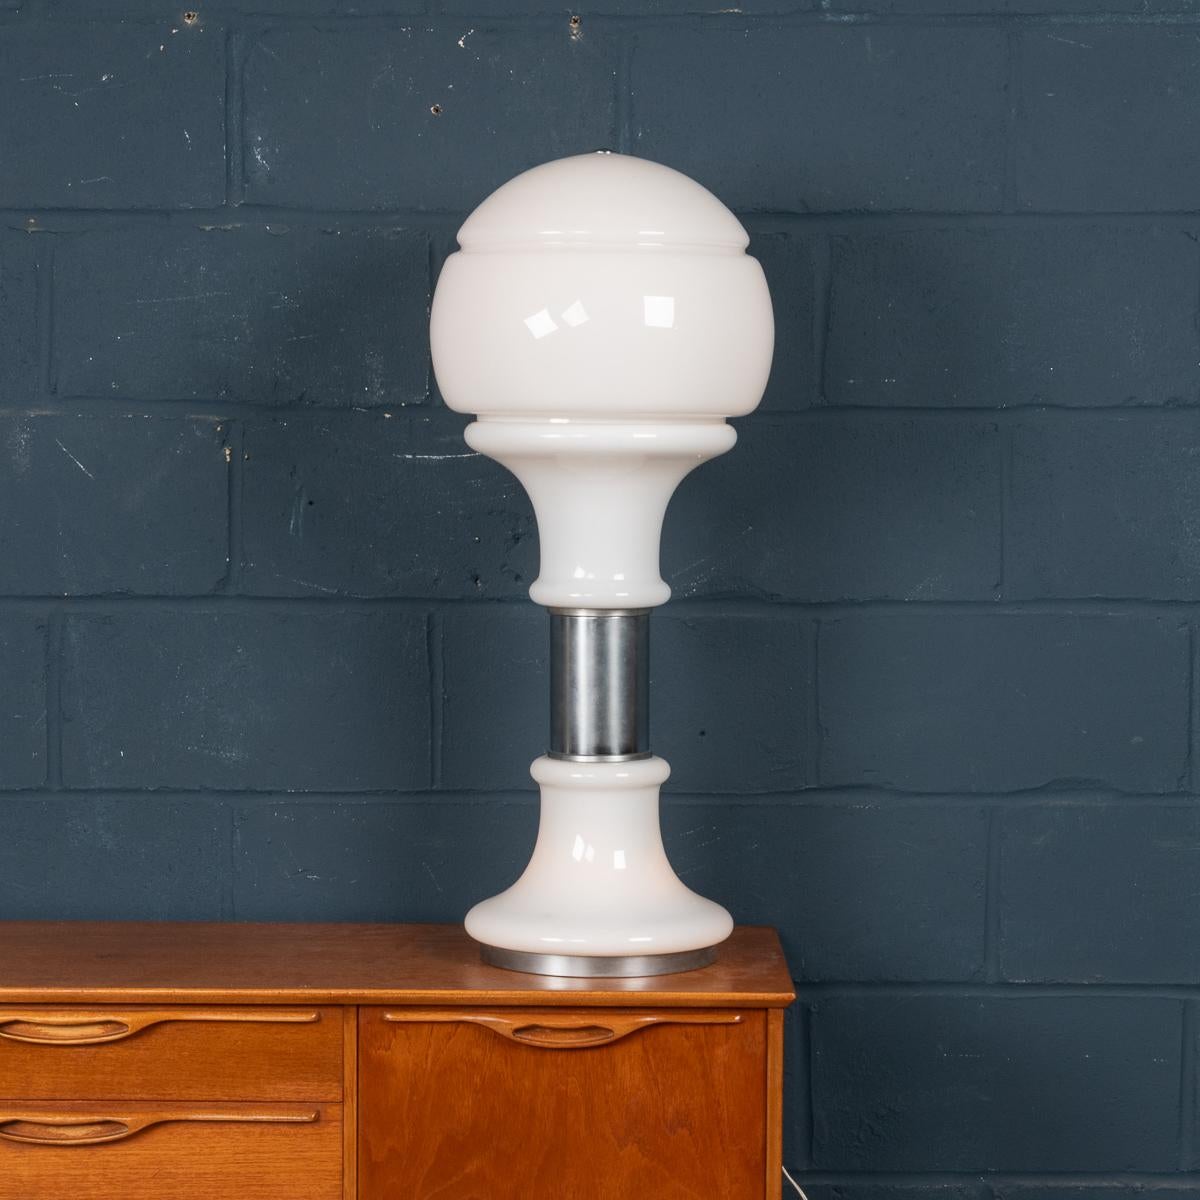 A wonderful vintage Italian table lamp made by Carlo Nason for Mazzega. Produced in Murano, Venice in the 1970's, this chrome and glass lamp exemplifies Carlo Nason’s workmanship. Nason has used a gorgeous white milky glass which gives a fantastic